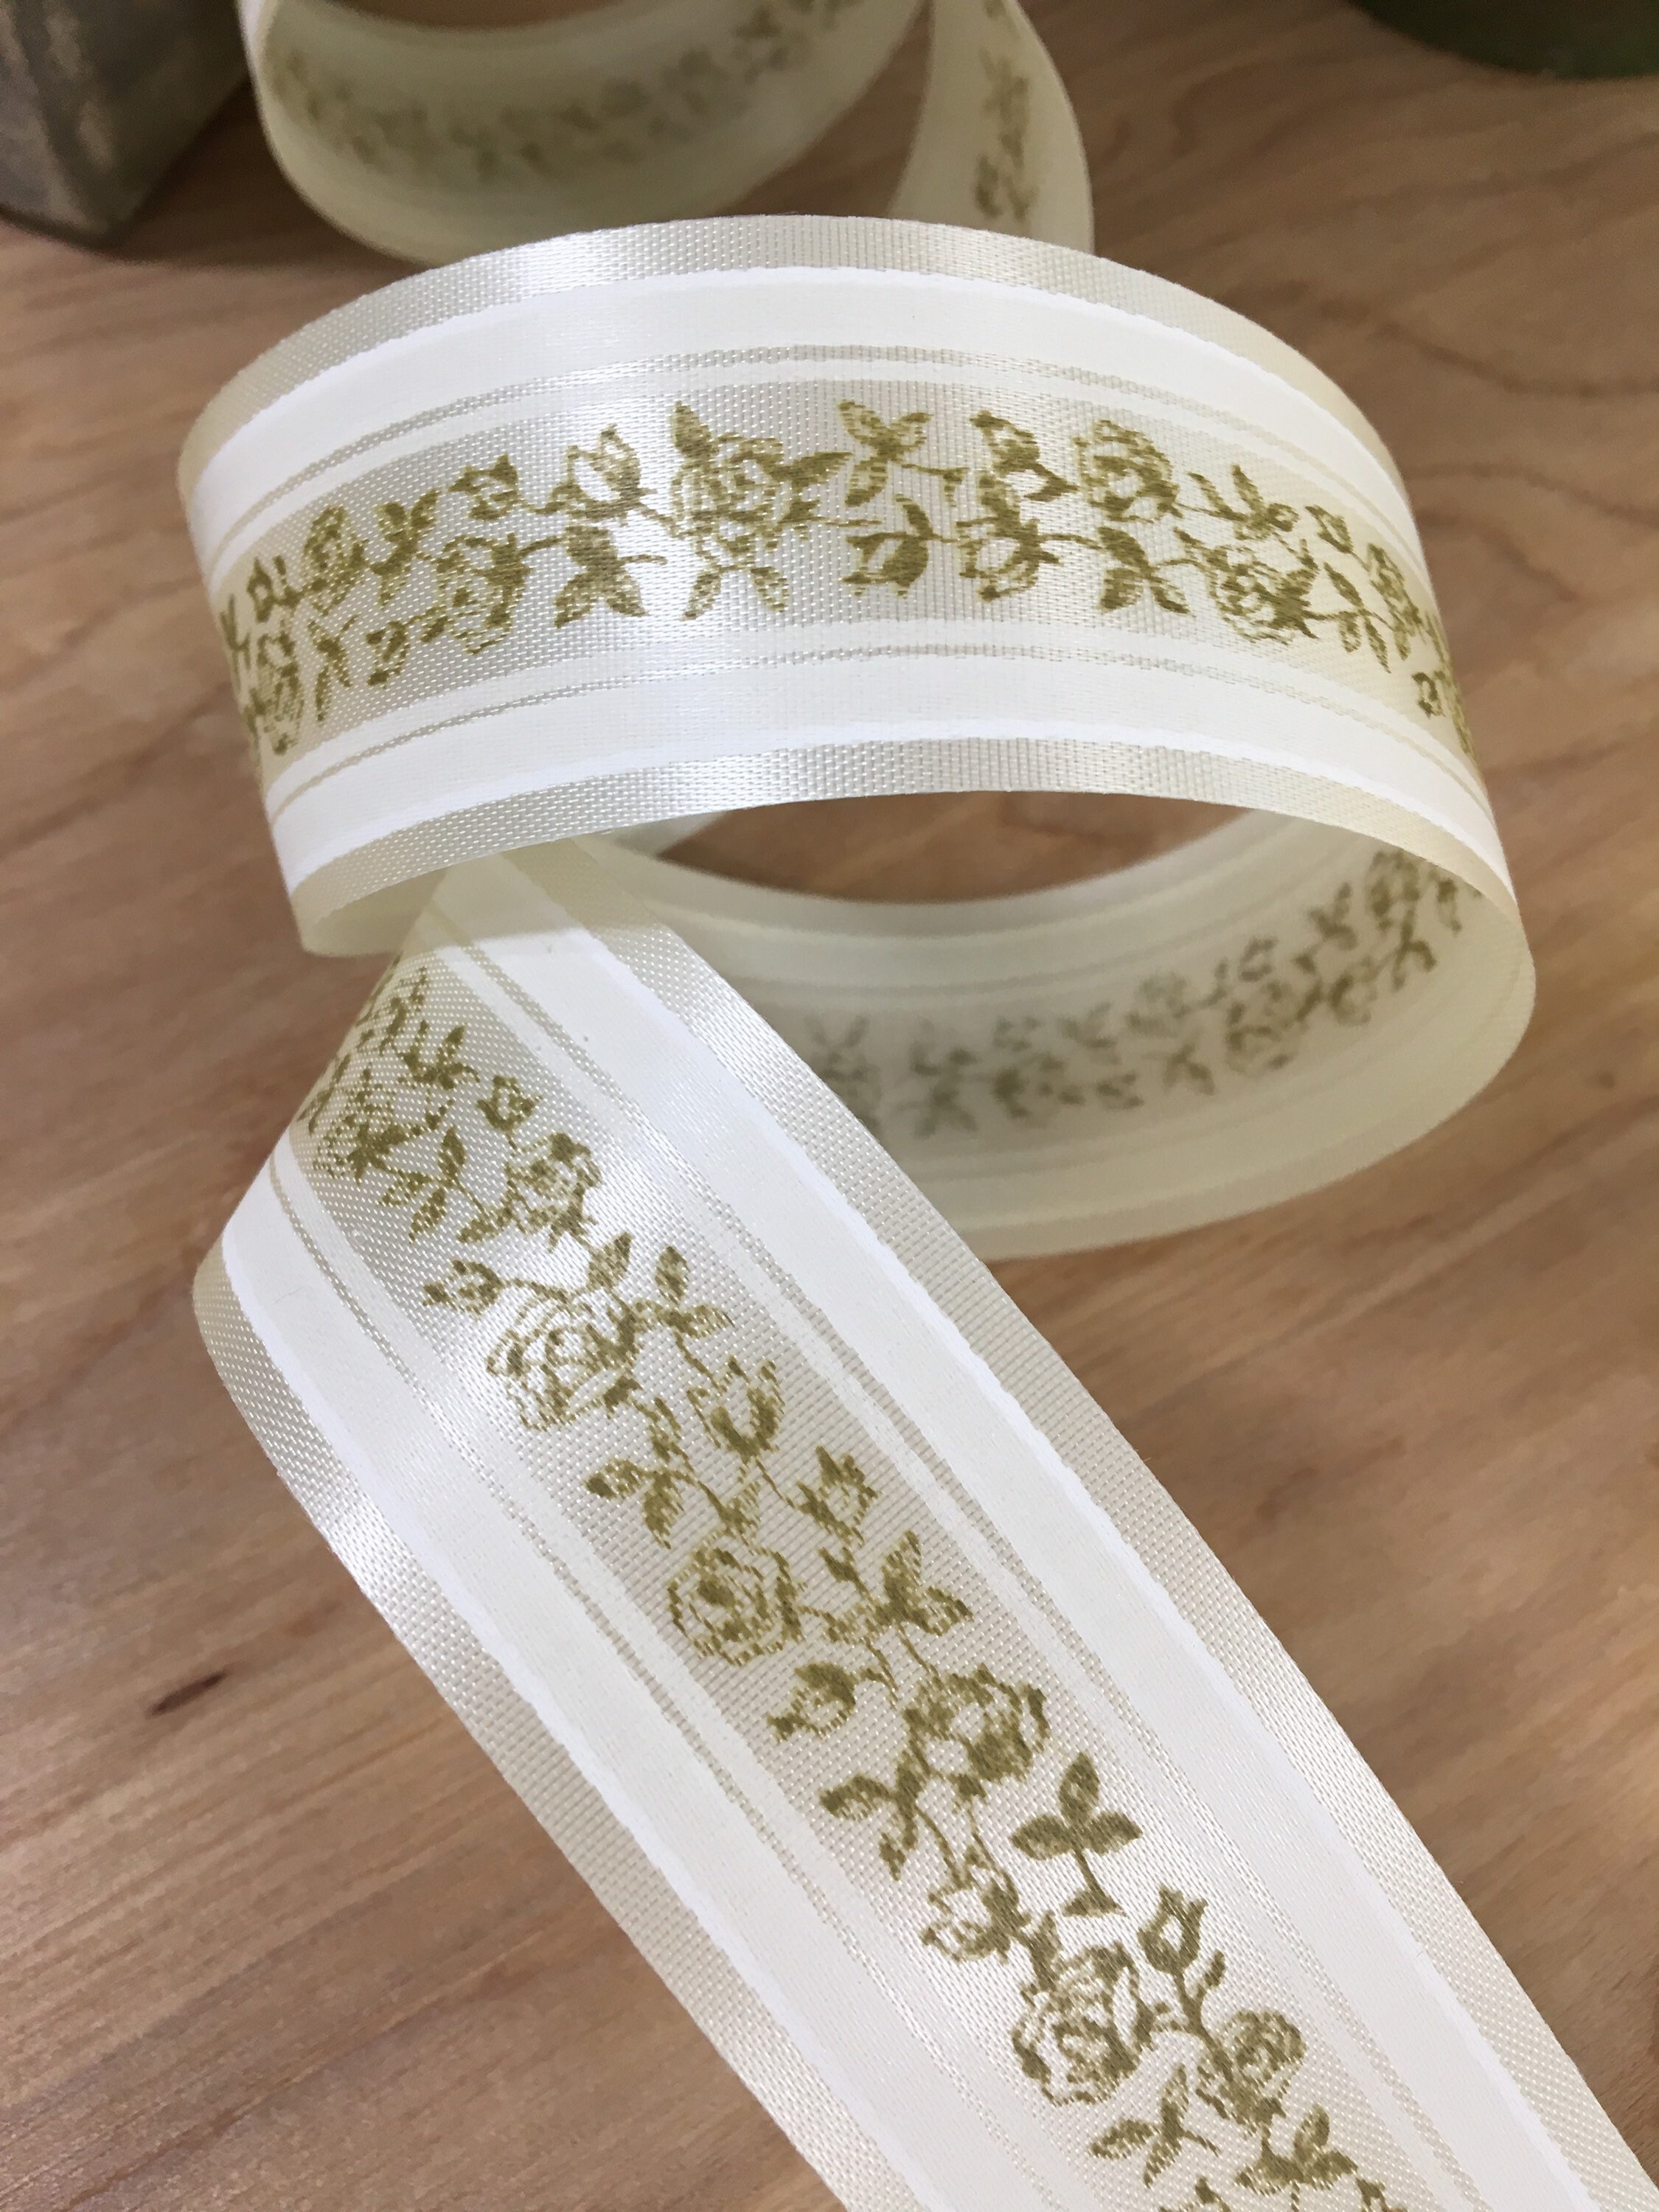 VATIN 5 Rolls 125-Yards Glitter Metallic Gold Ribbon 1/4 inches Sparkly  Fabric Thin Ribbon for Gift Wrapping Wedding Party Brithday Floral Projects